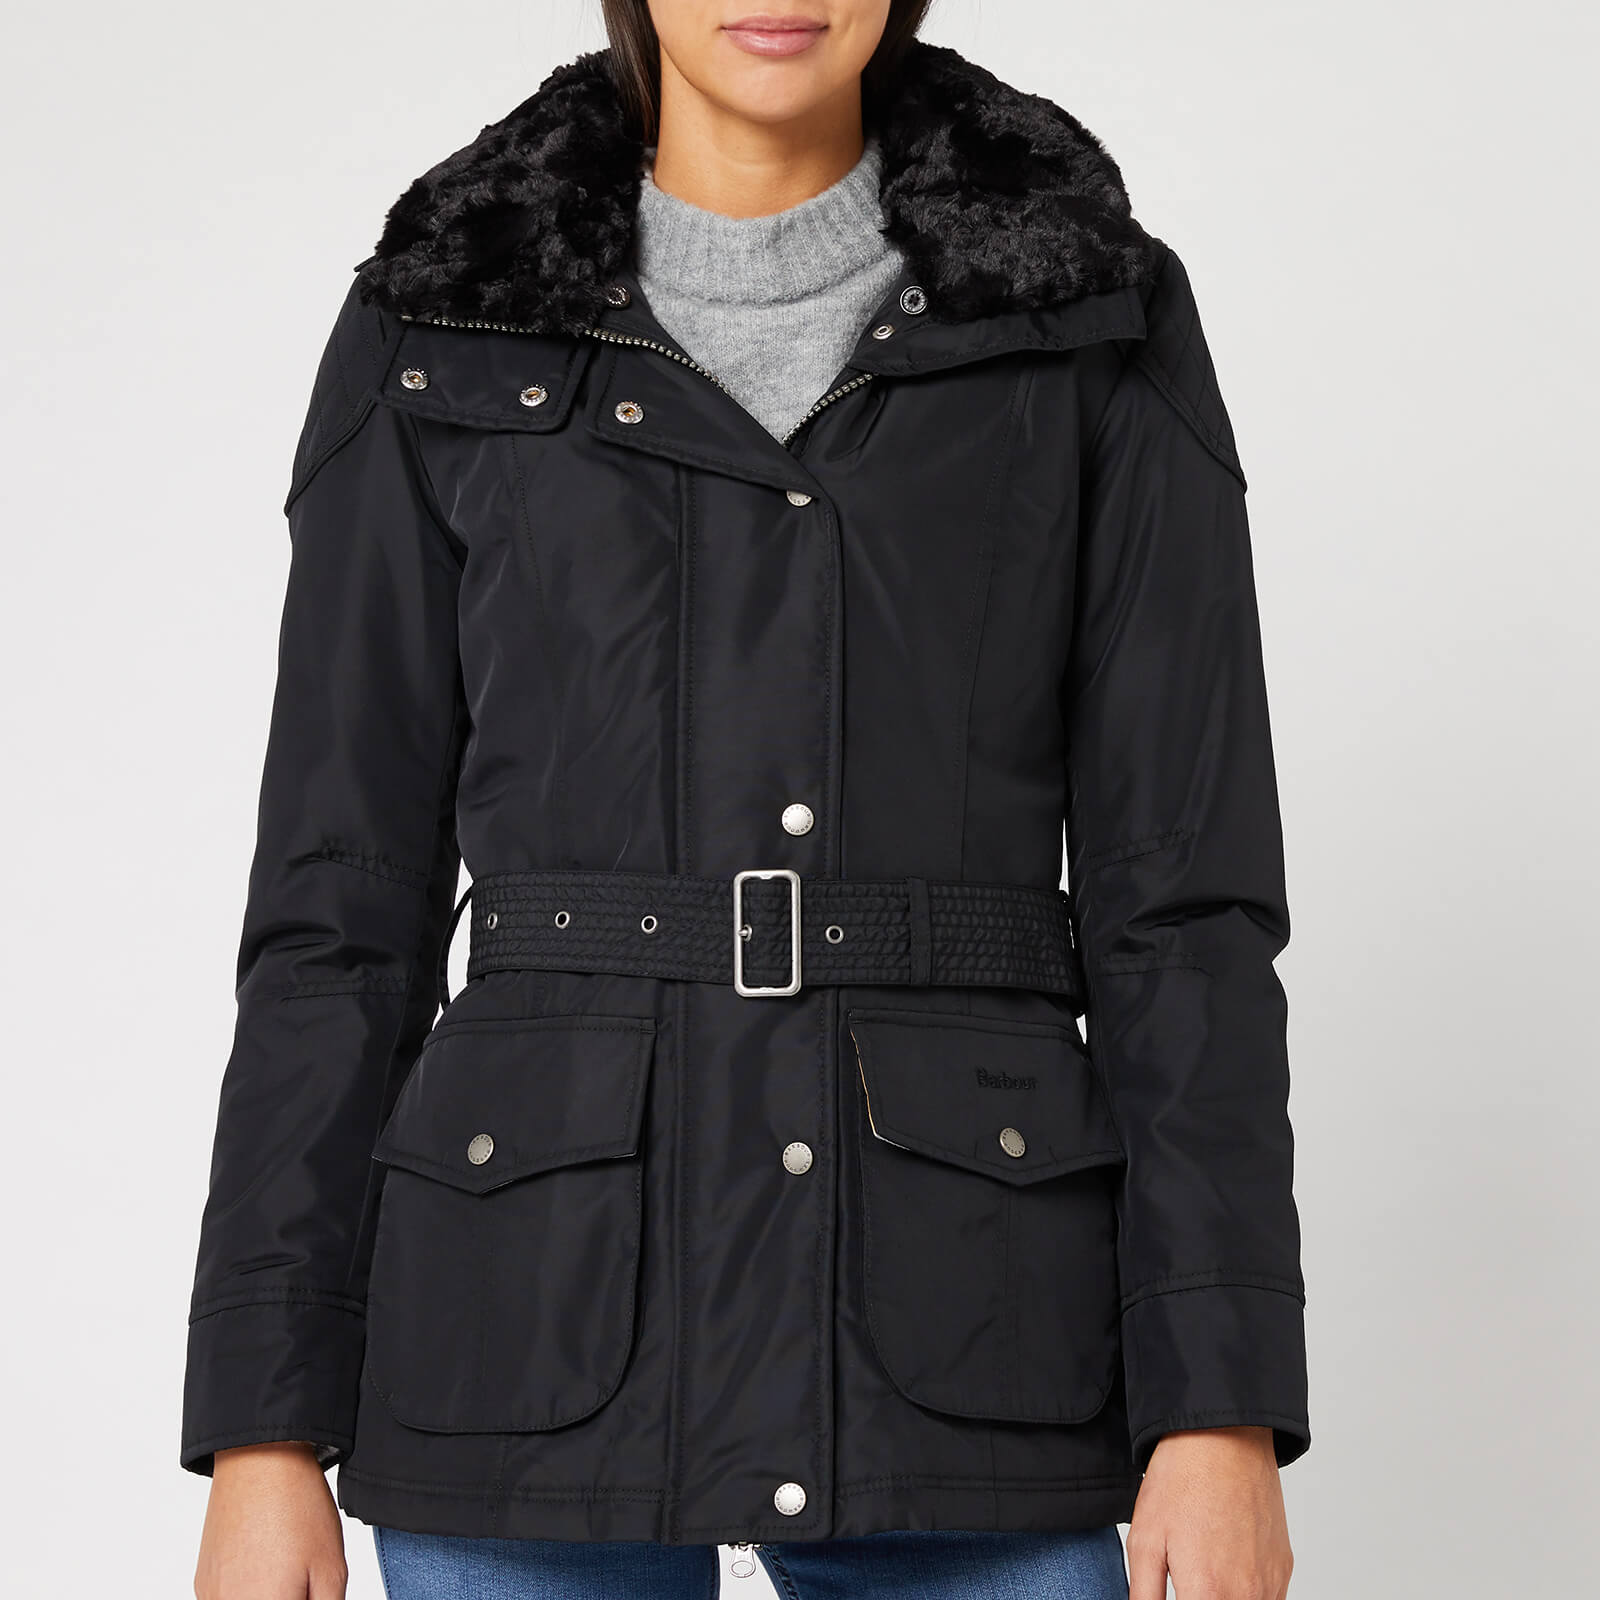 barbour international outlaw hooded jacket